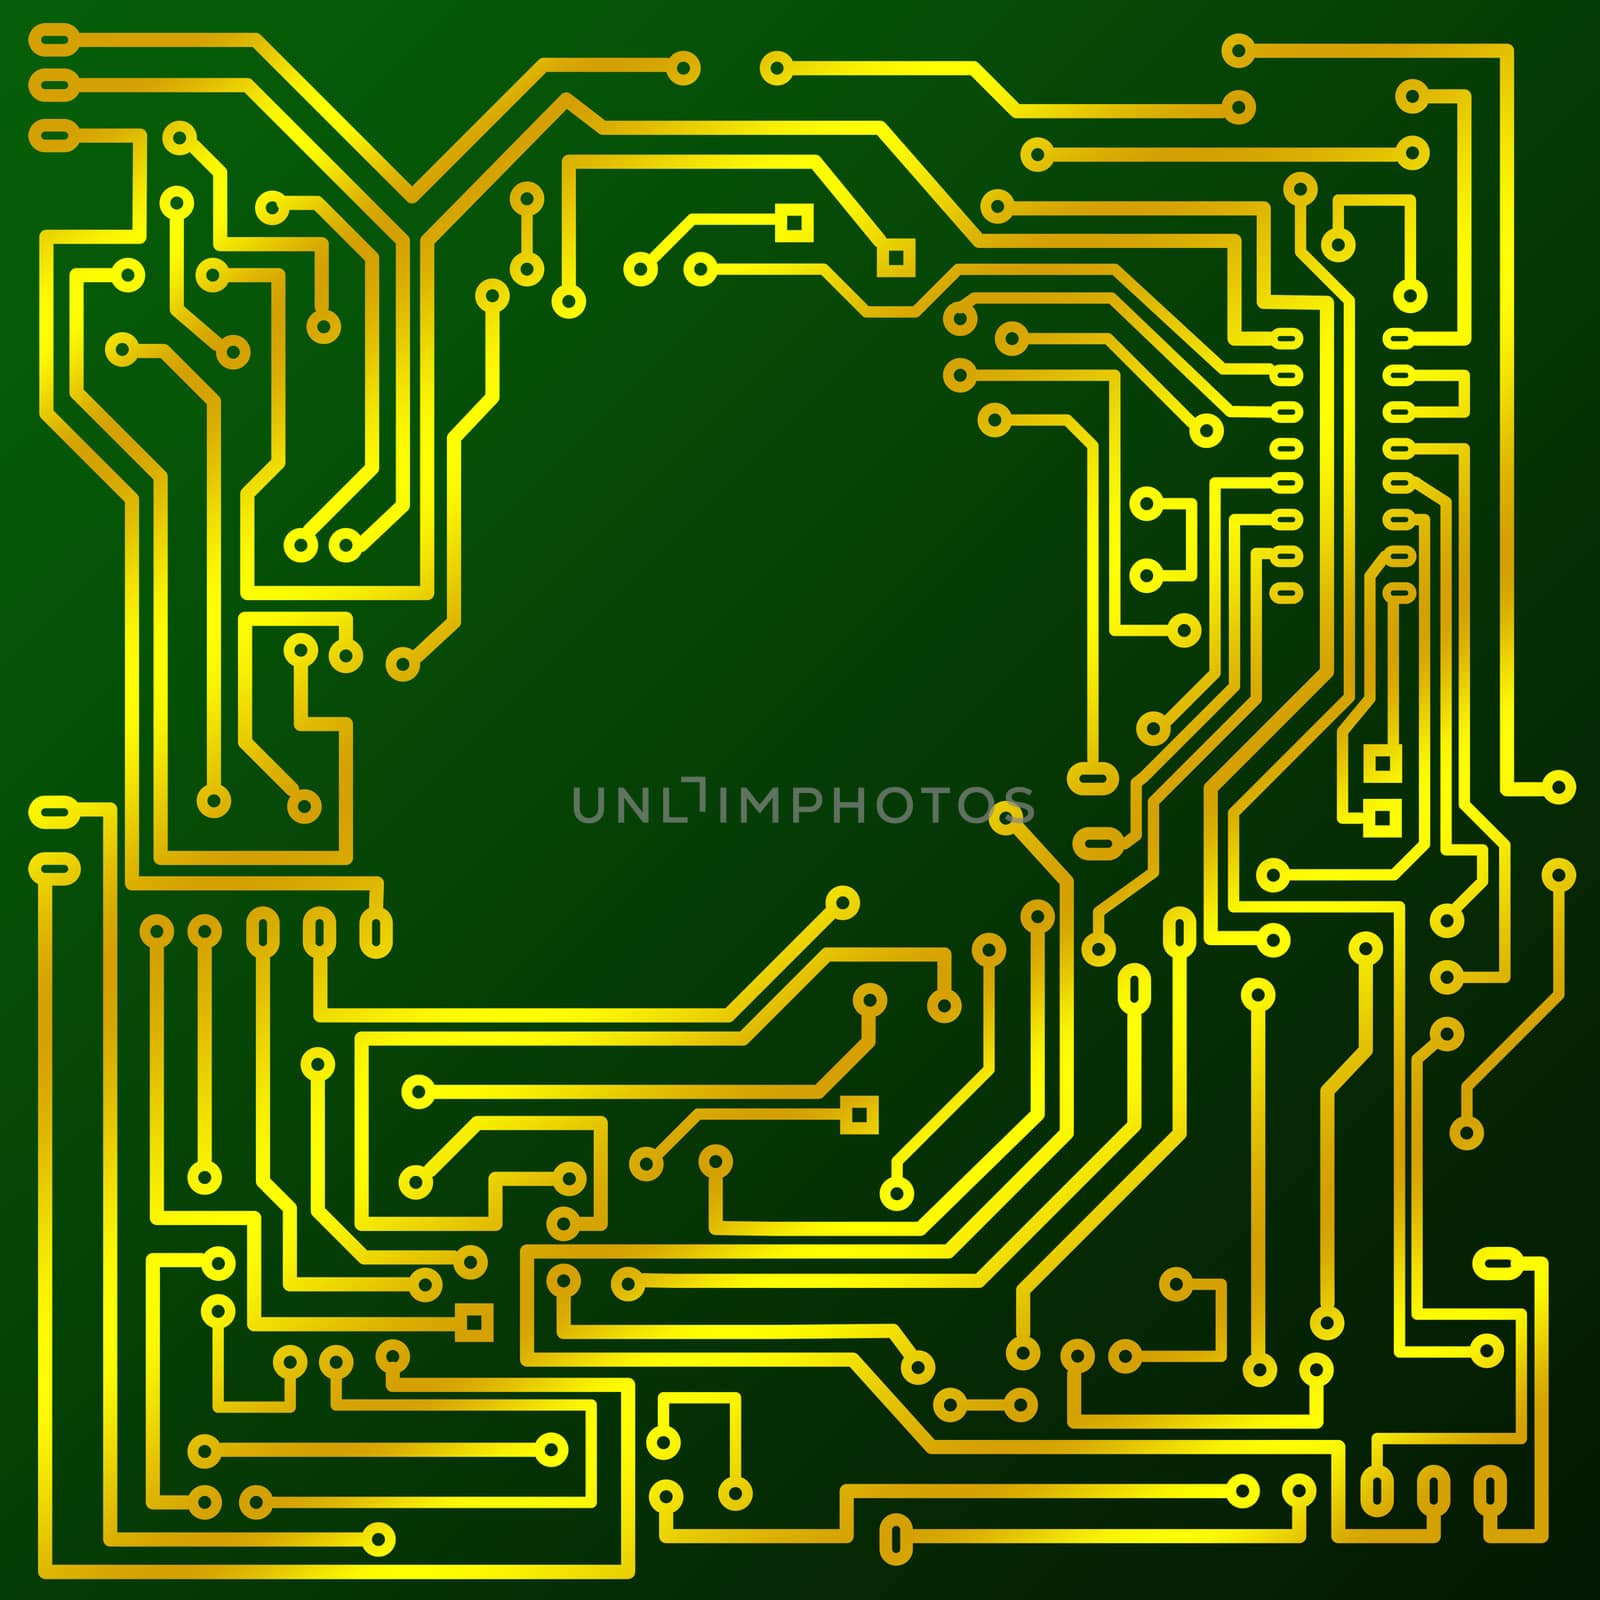 cuprextit green plate with copper and gold printed circuit board